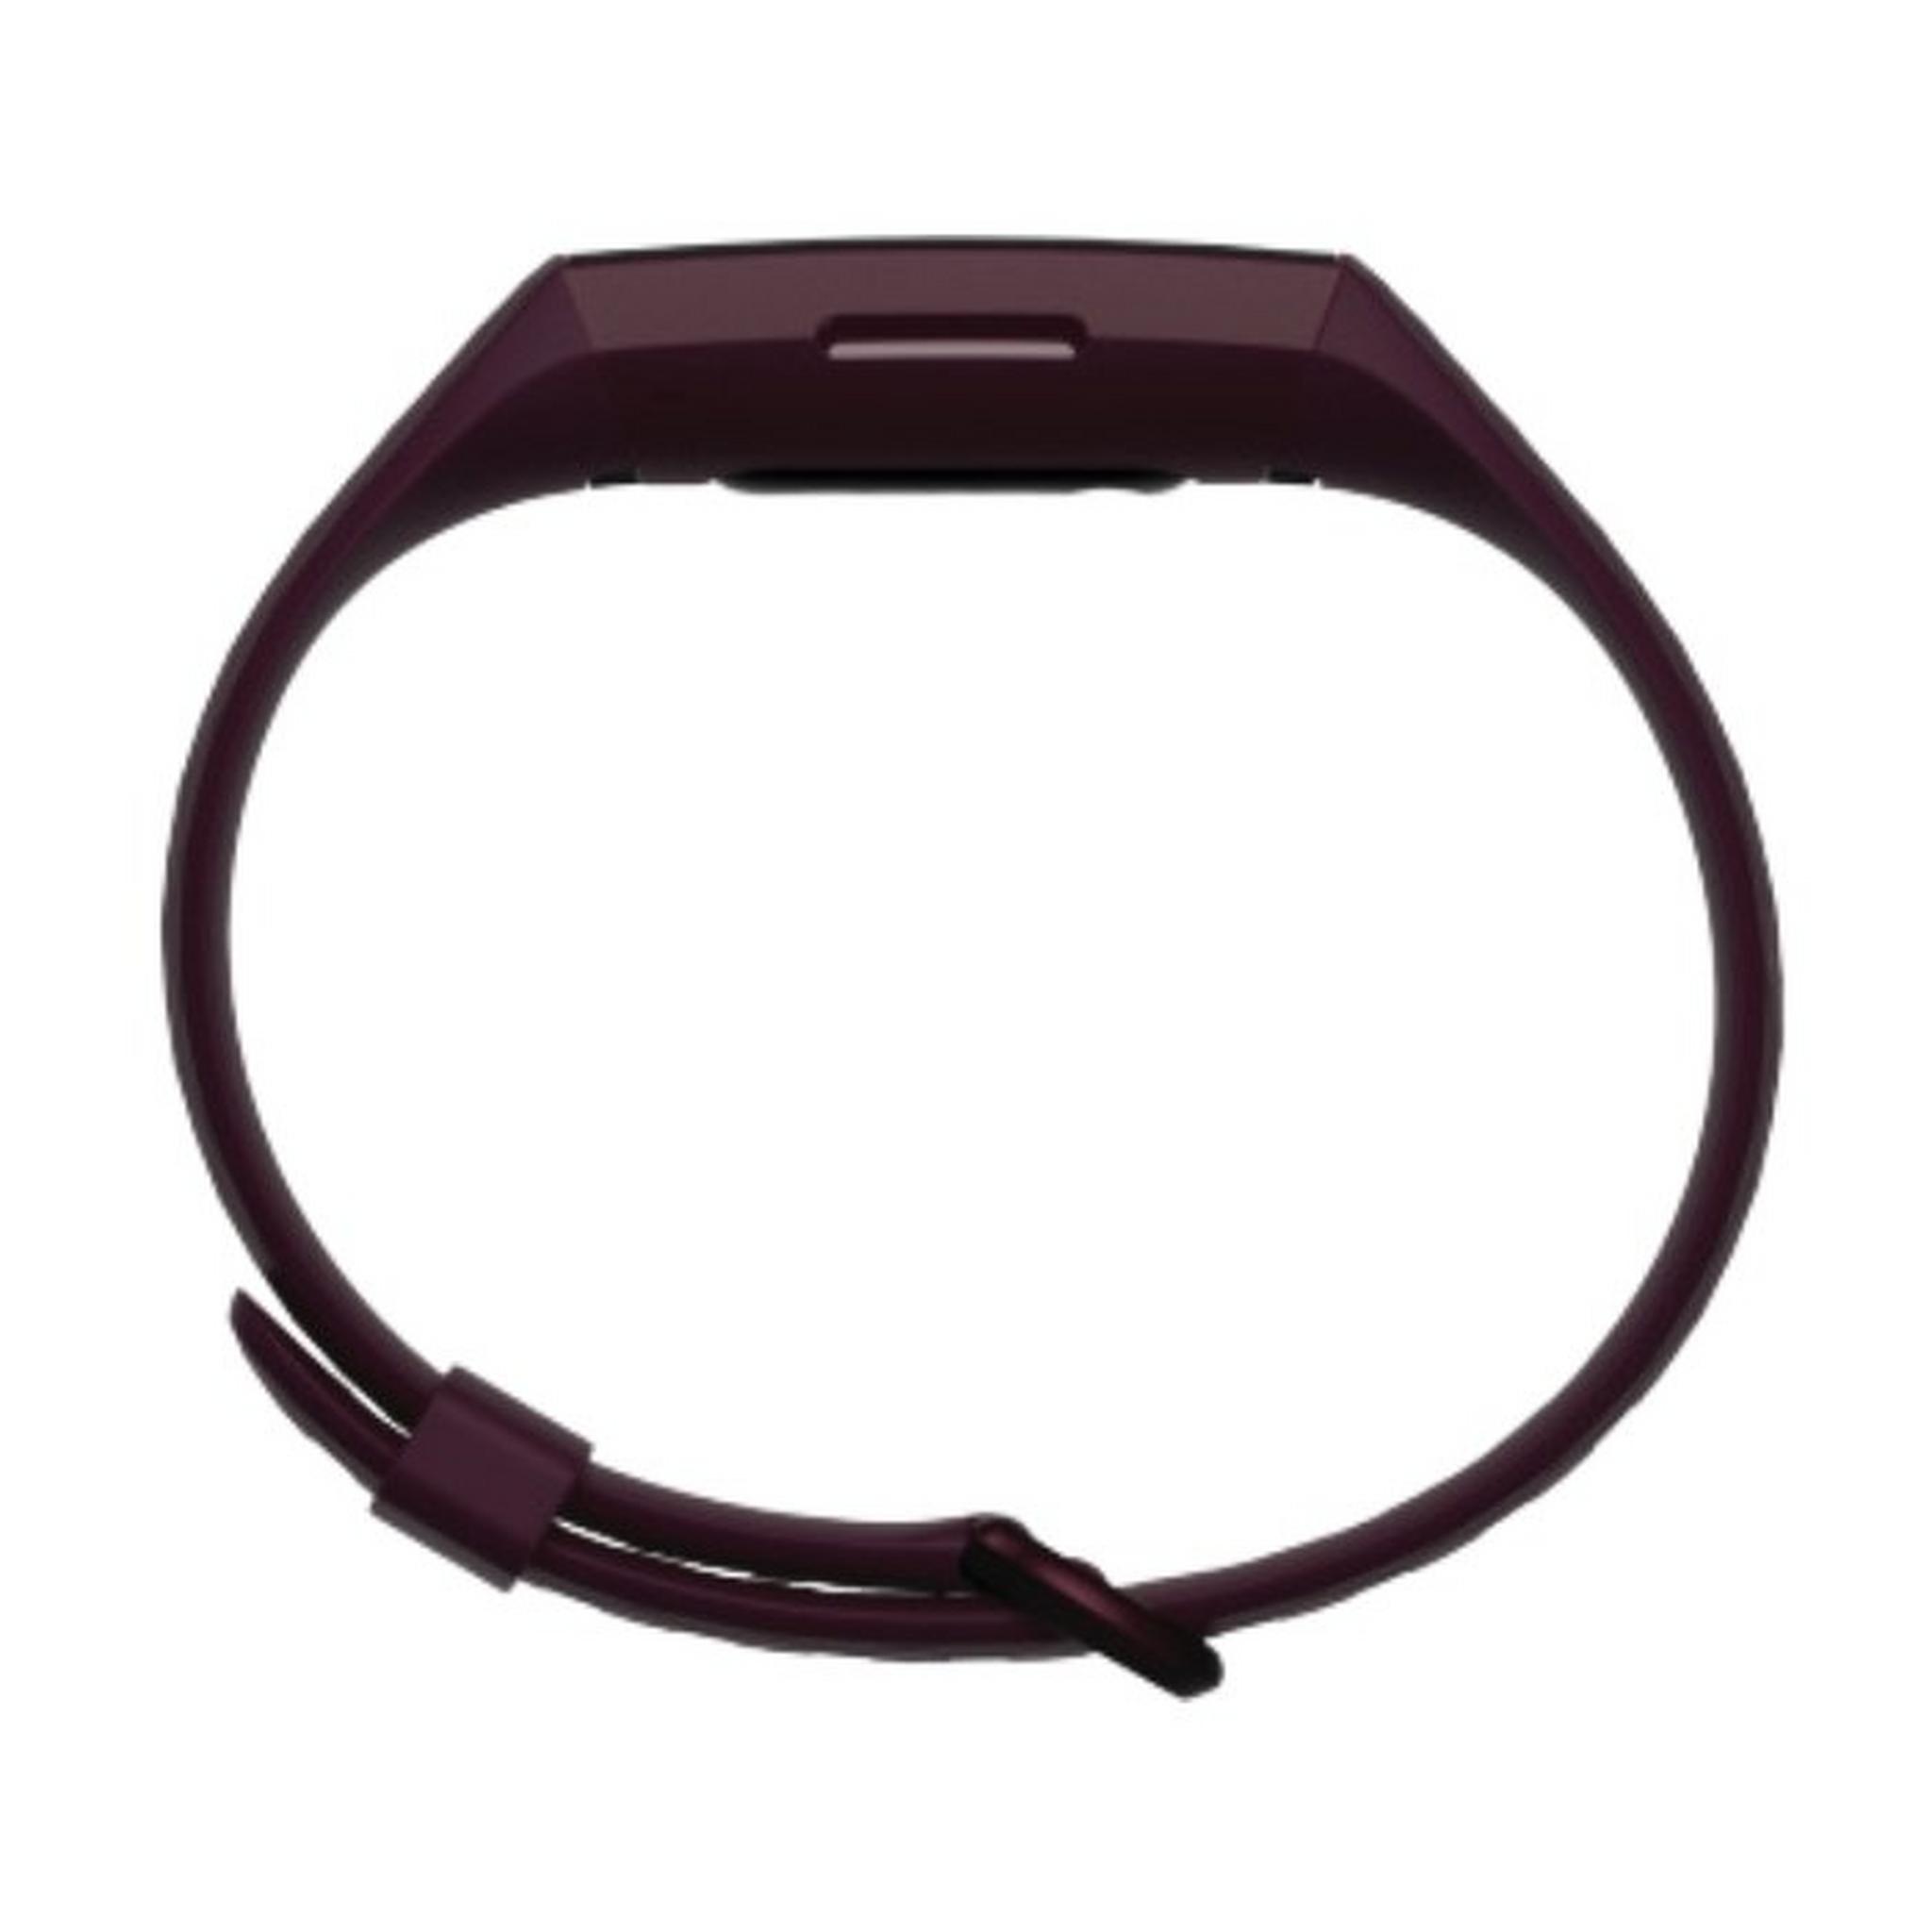 Fitbit Charge 4 NFC Fitness Tracker - Rosewood